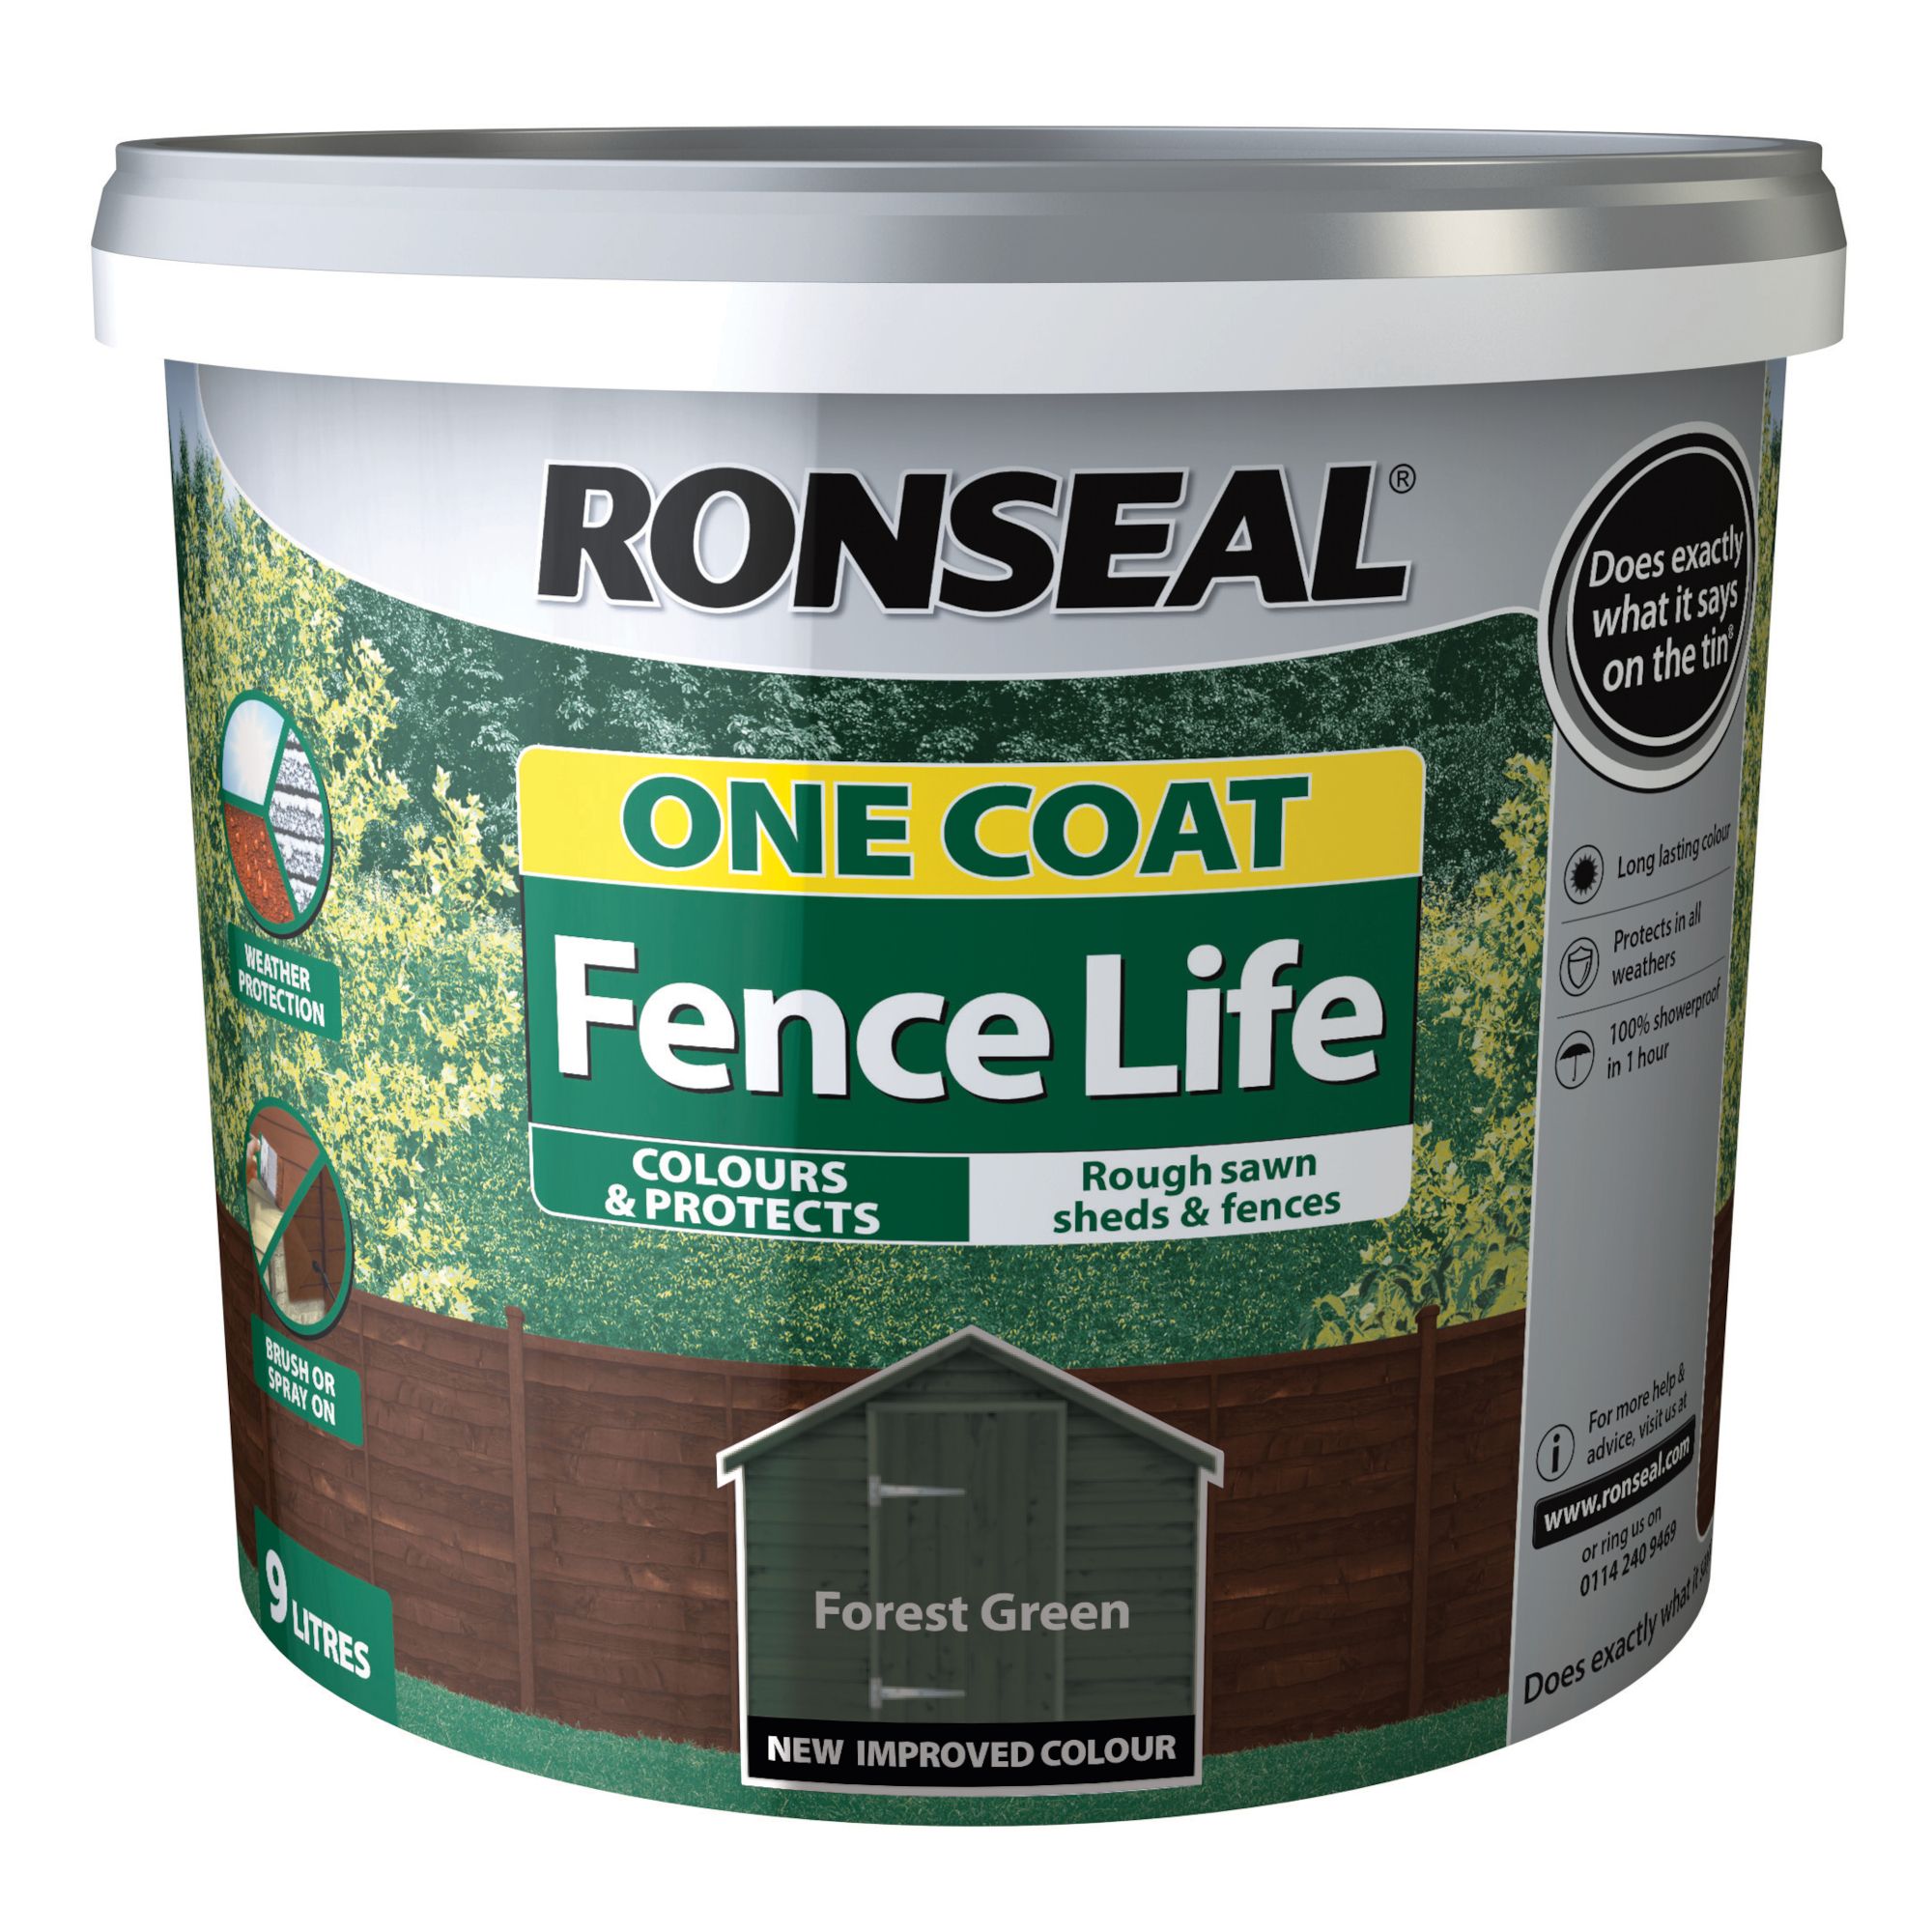 Ronseal One Coat Fence Life Forest green Matt Exterior Wood paint, 9L Tub